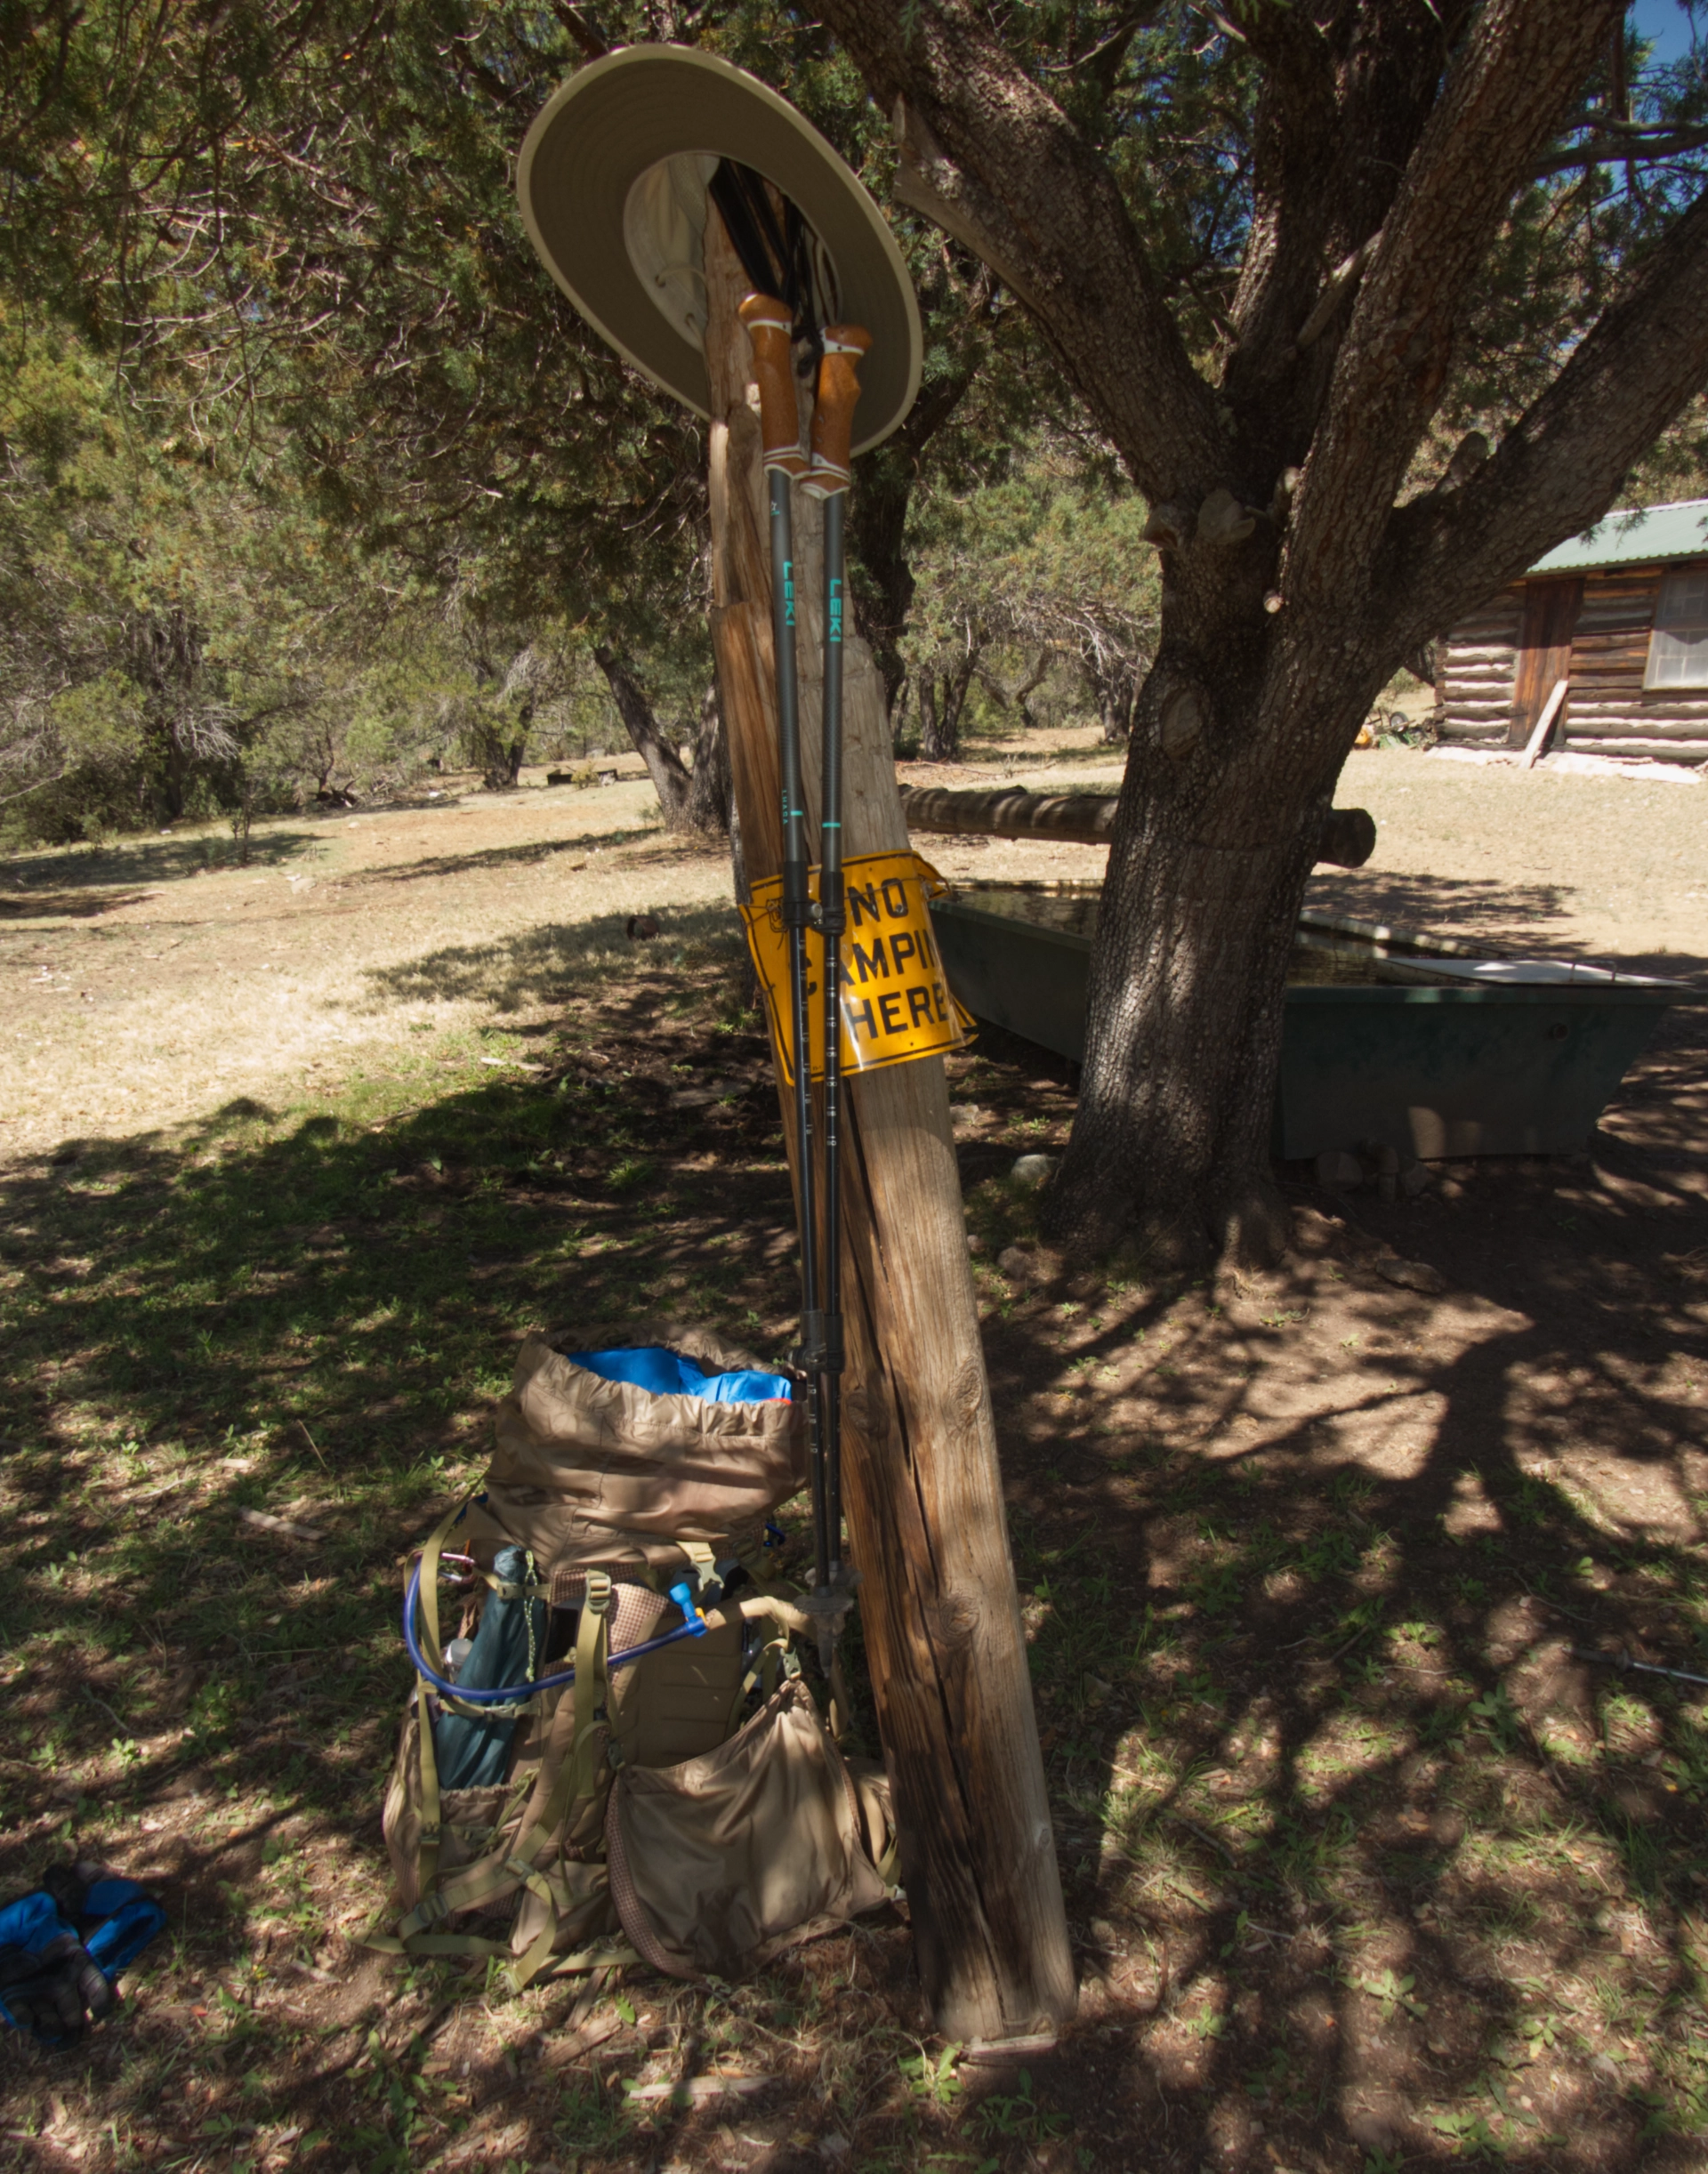 backpack, hat and poles leaning on no camping sign